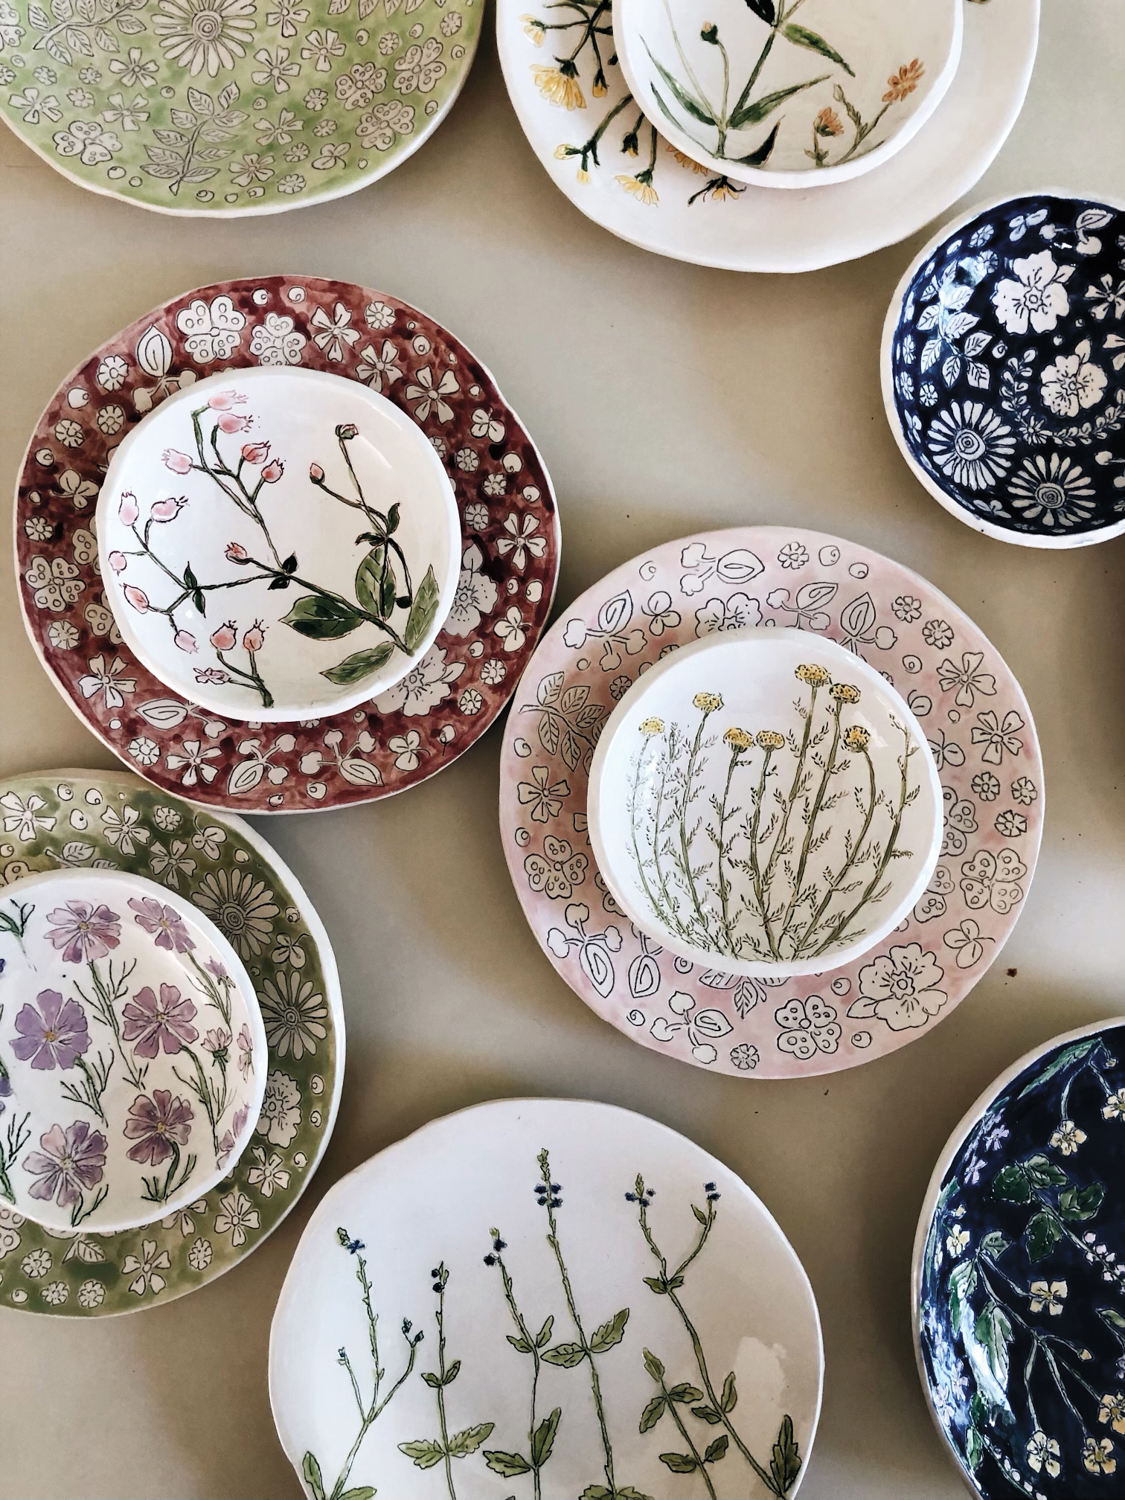 Dorotea Ceramics' colorful plates embellished with flowers.